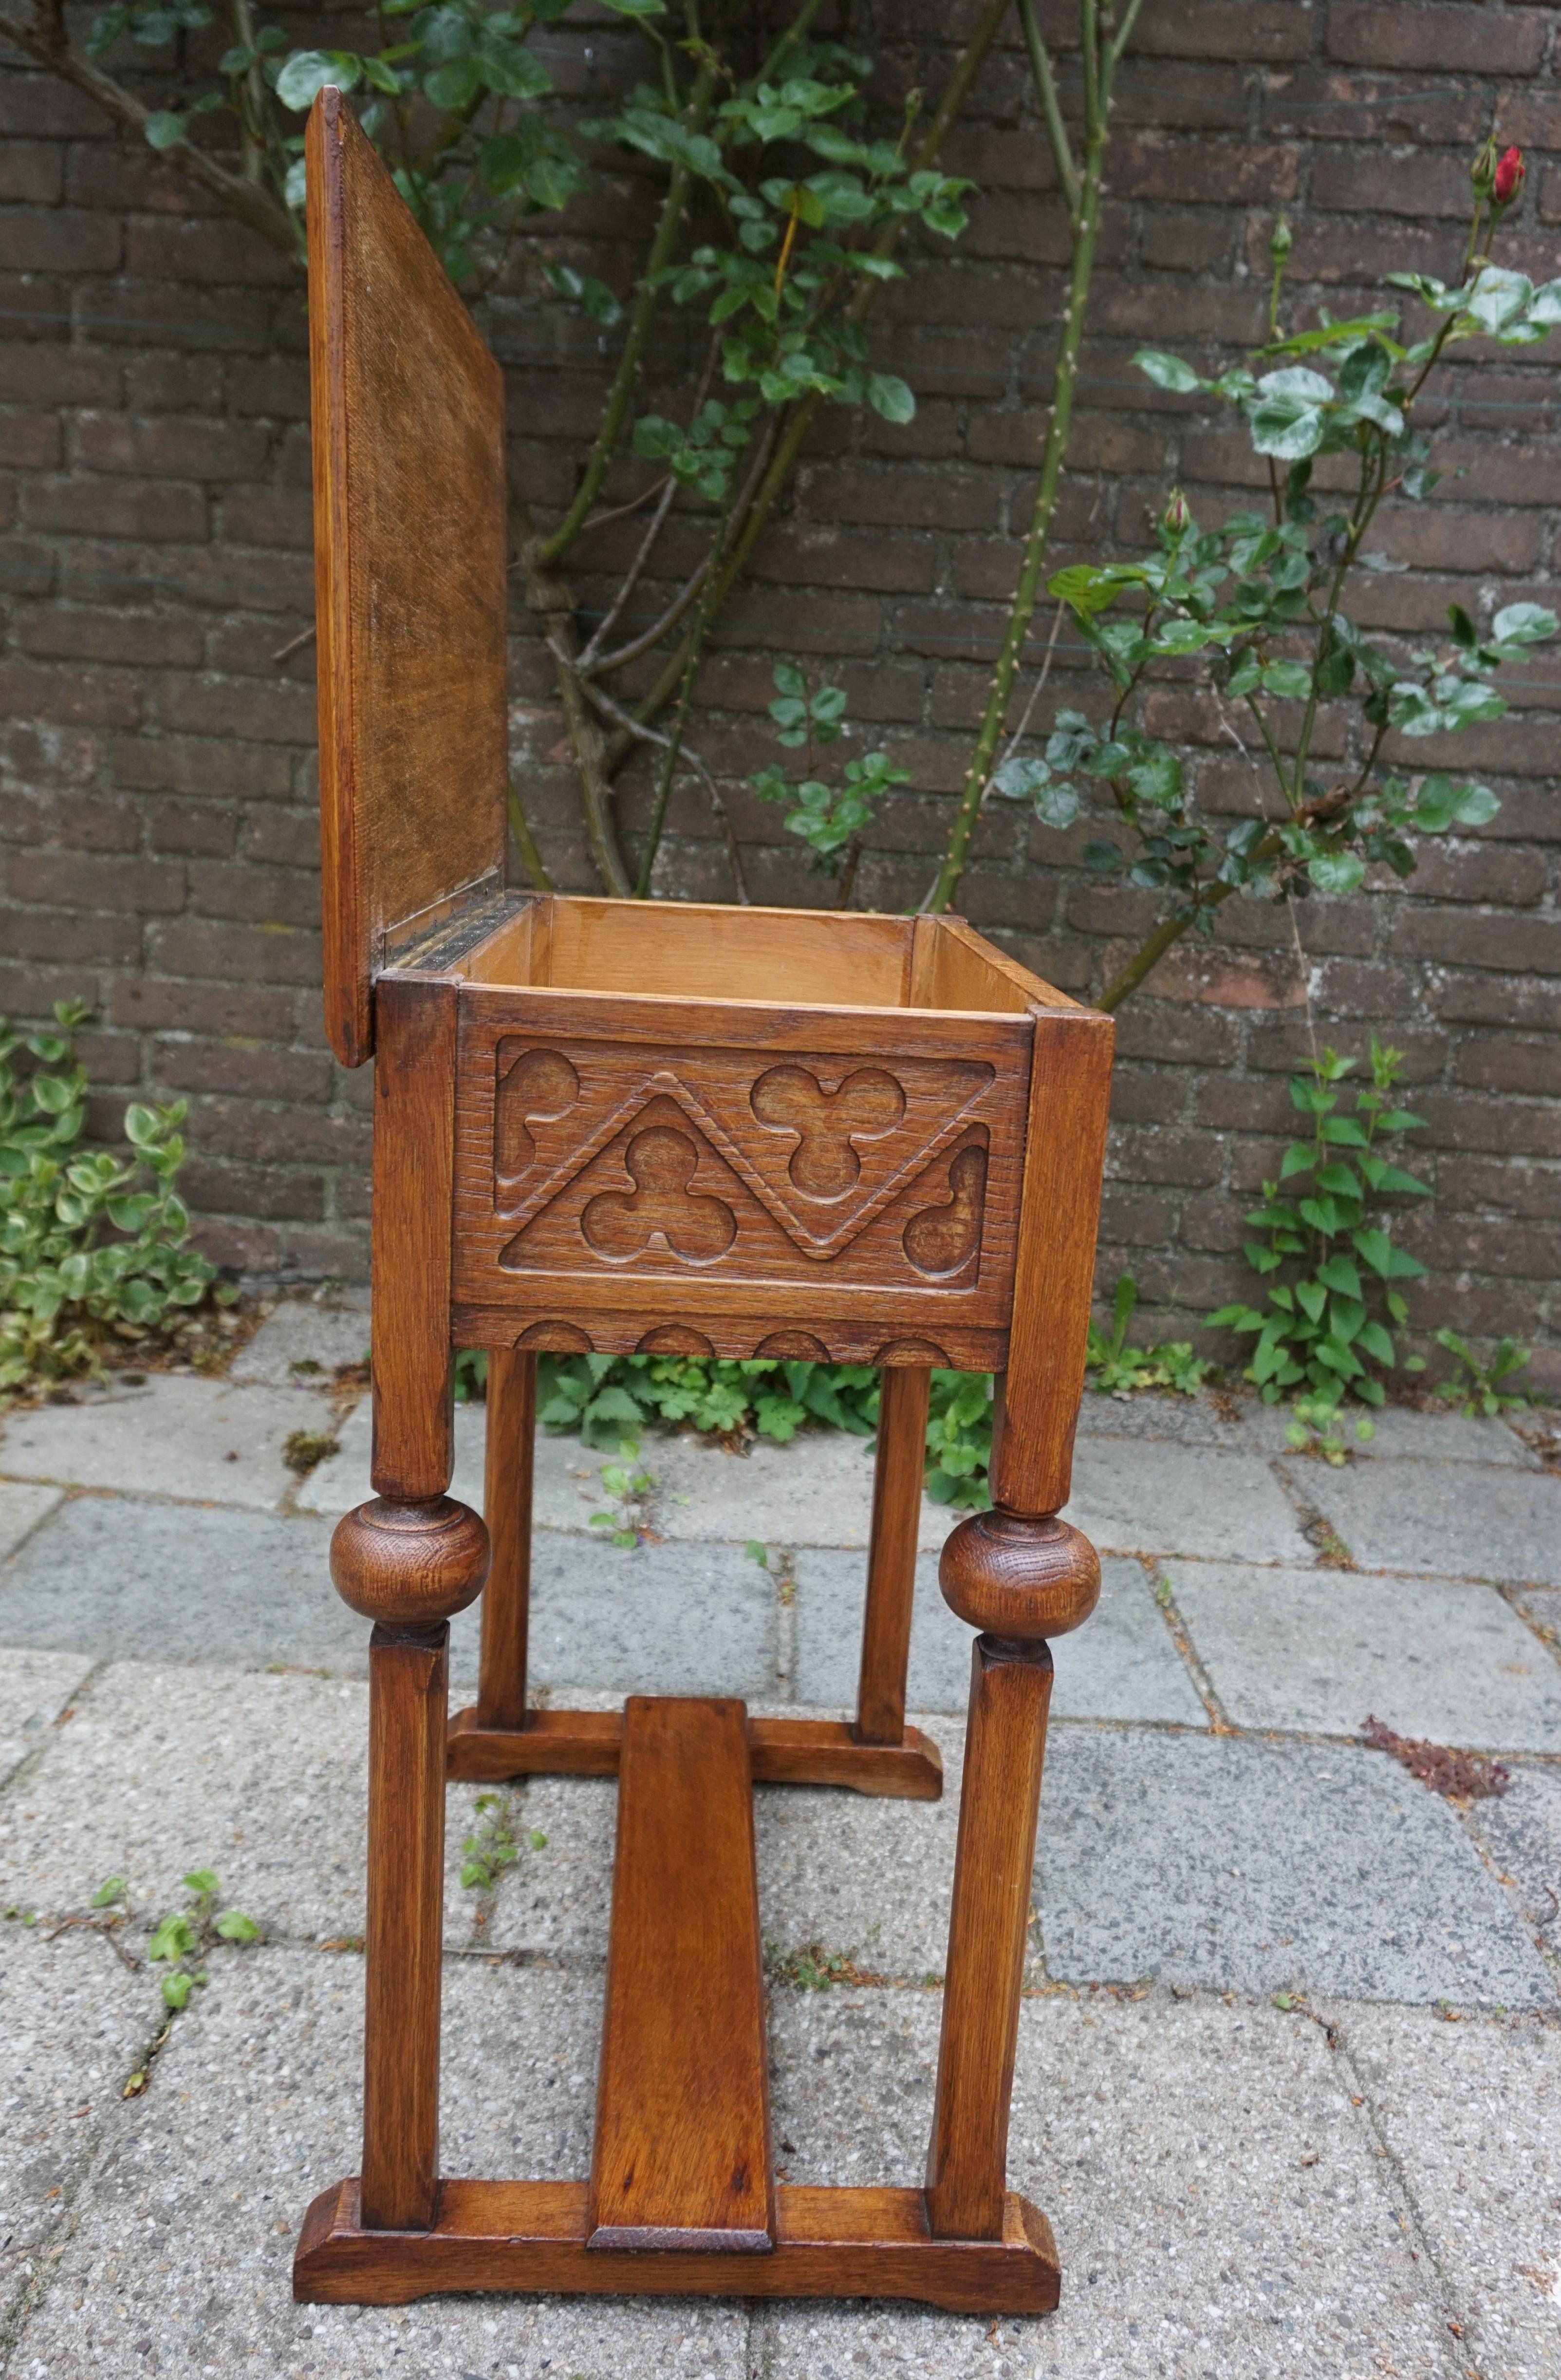 Oak Early 1900s Handcrafted Gothic Revival Work or Side Table with Trefoil Decor